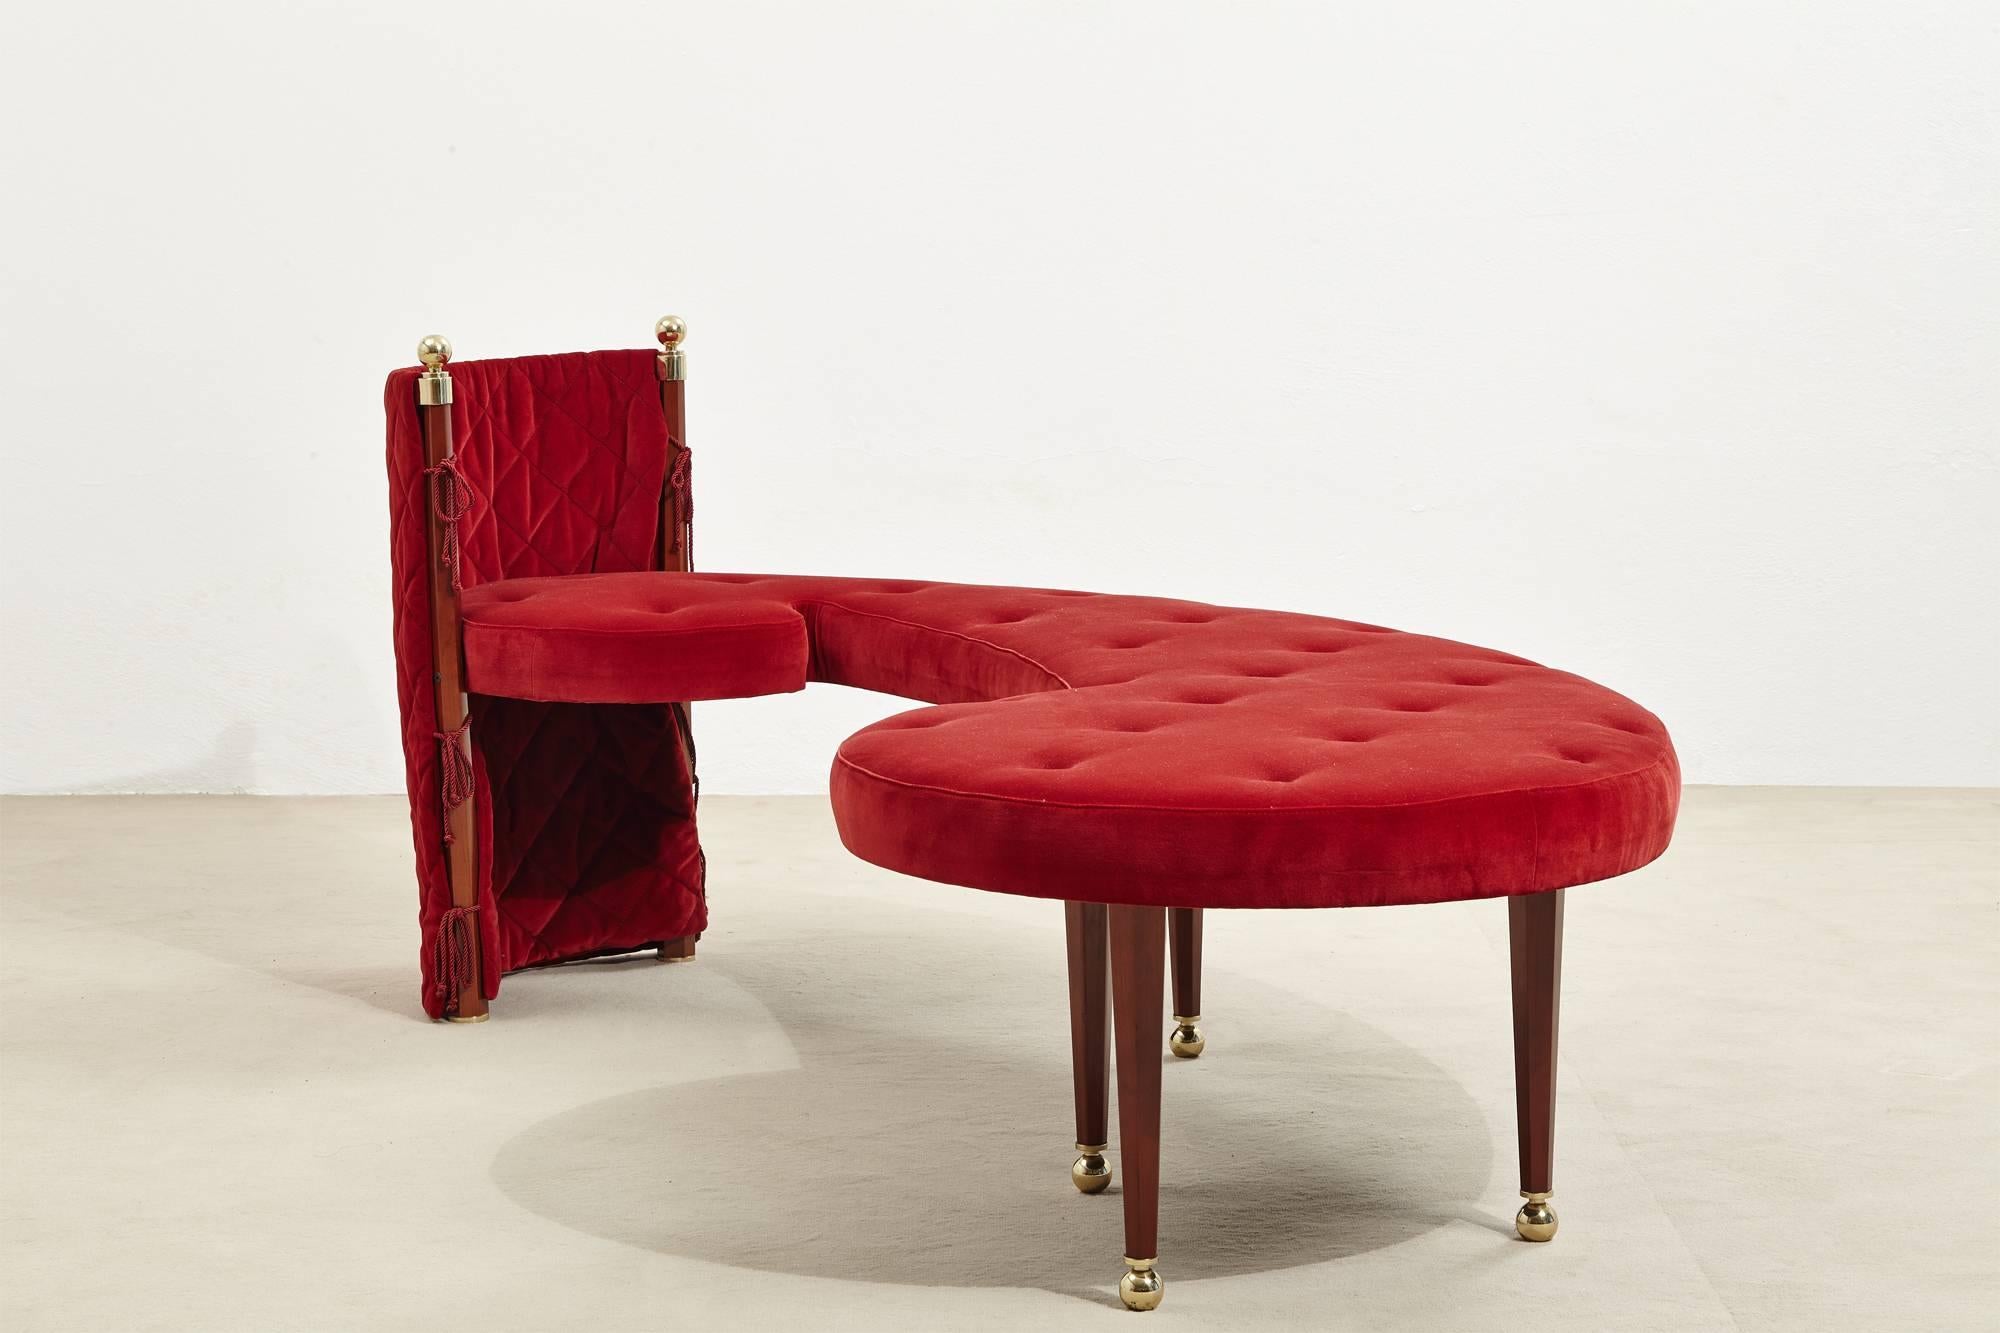 Elegant three-seat bench designed by Jeannot Cerruti for Milanese company Sawaya & Moroni in 1991. 
The bench has a cherrywood base, red velvet upholstery and fringing with polished brass details.